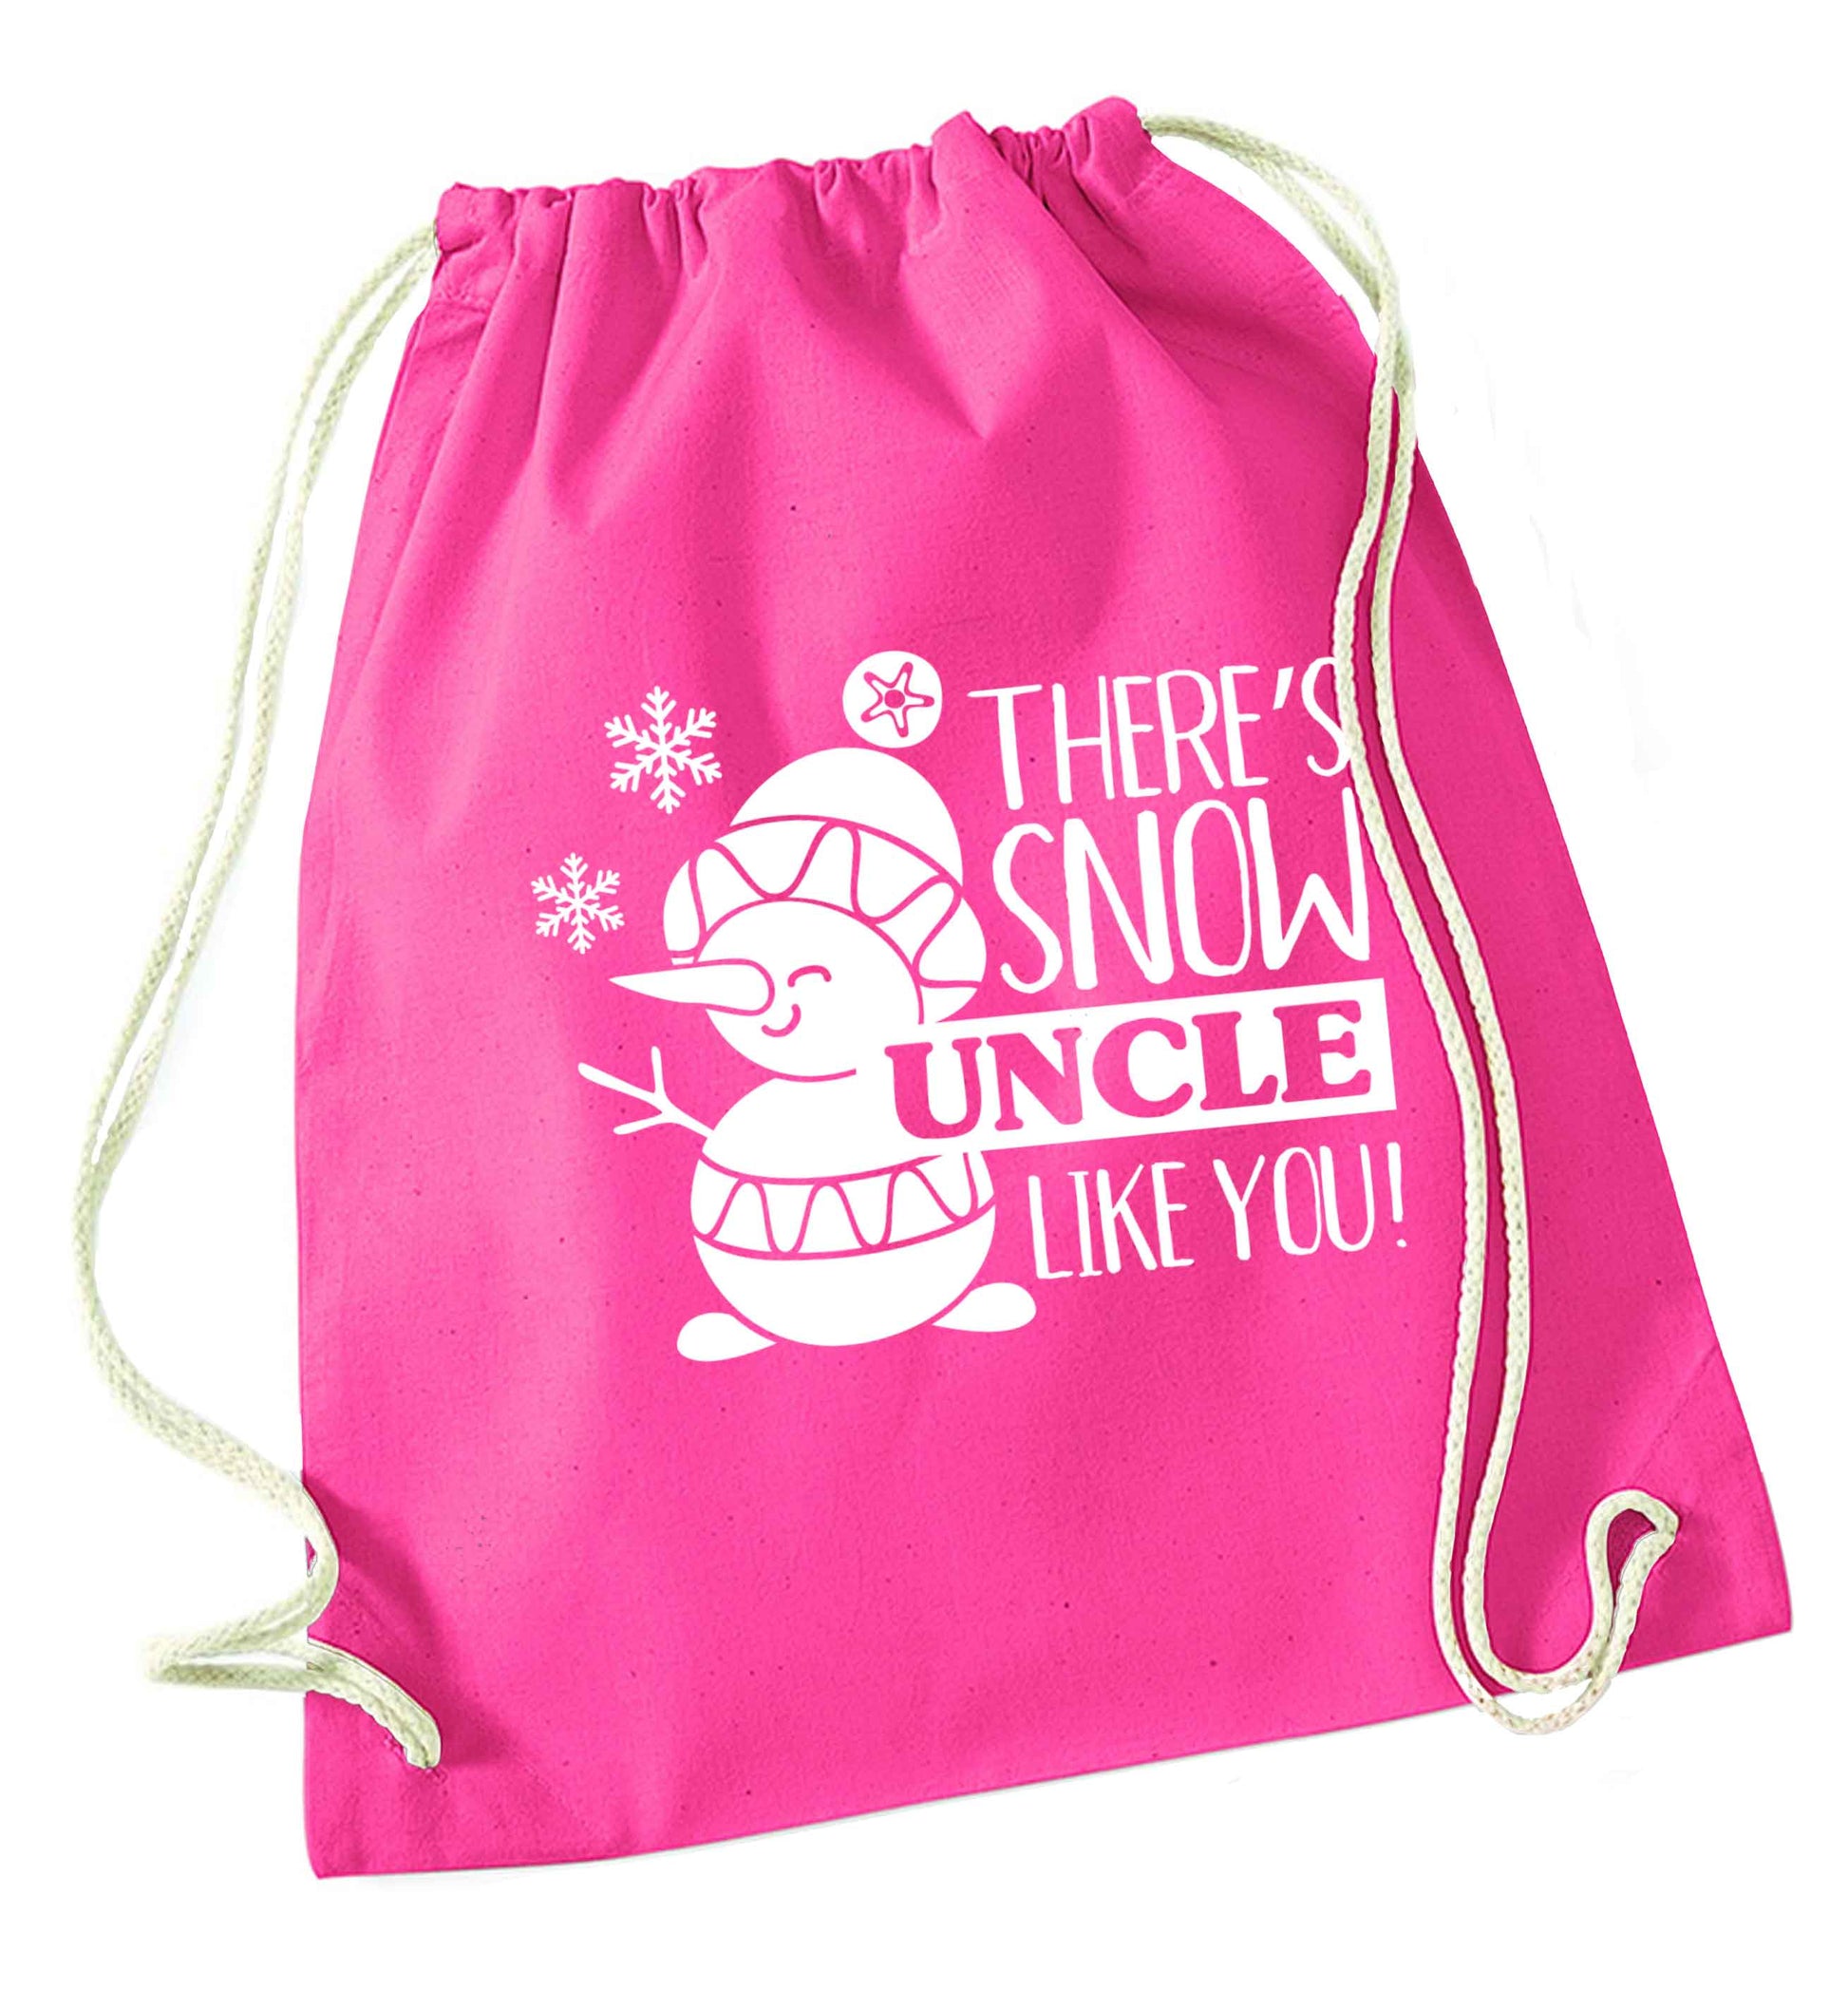 There's snow uncle like you pink drawstring bag